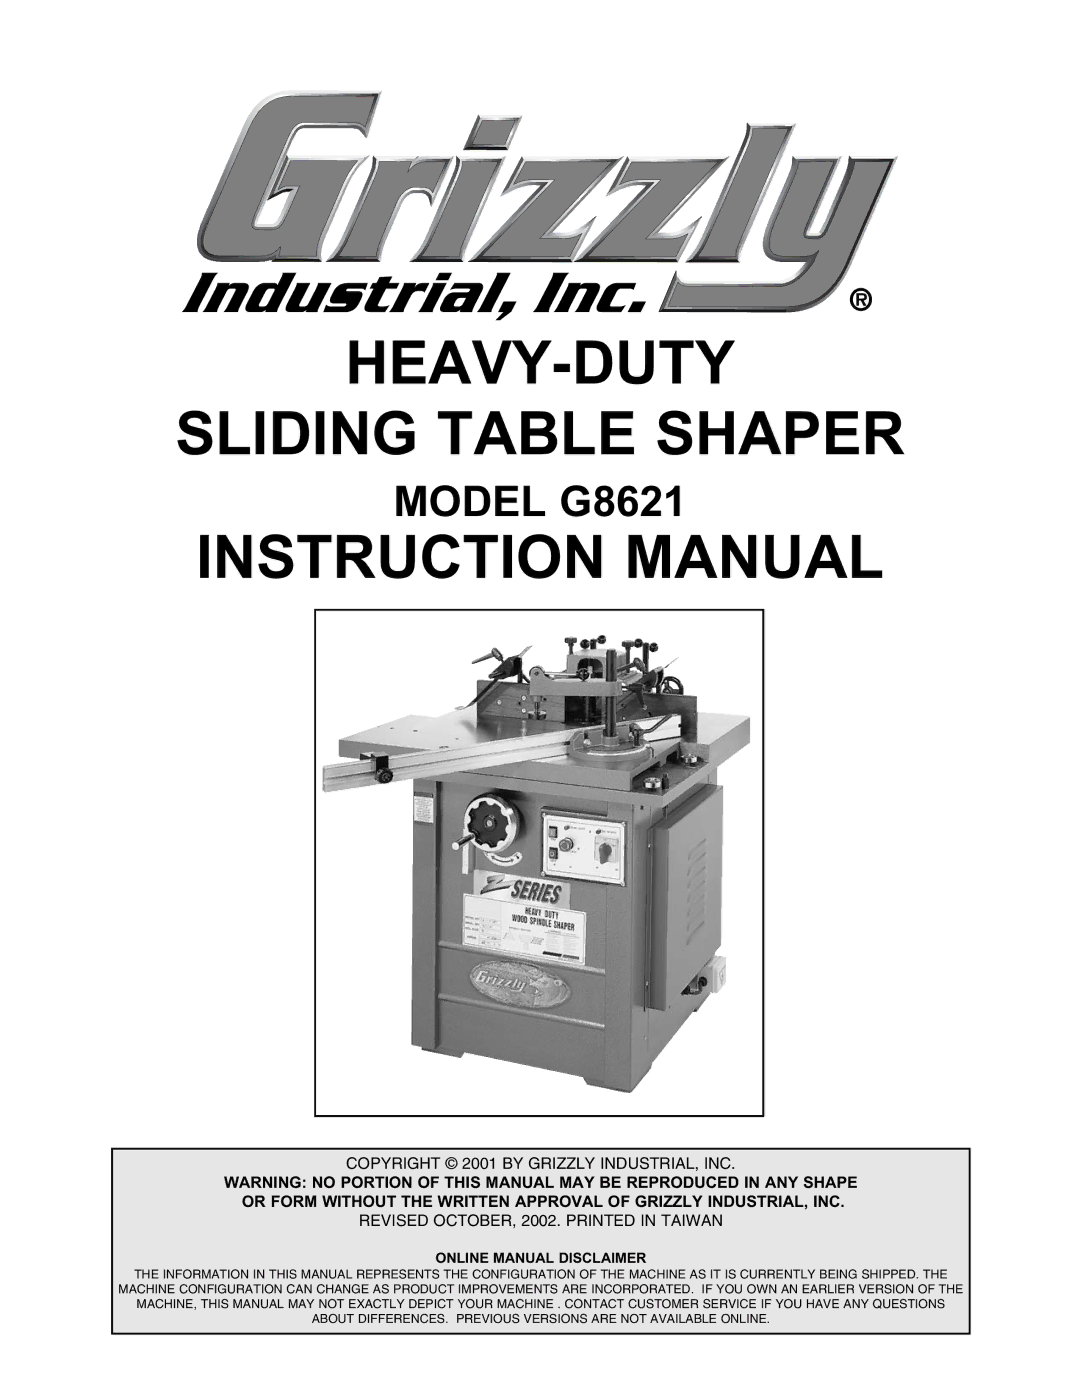 Grizzly G8621 instruction manual HEAVY-DUTY Sliding Table Shaper 